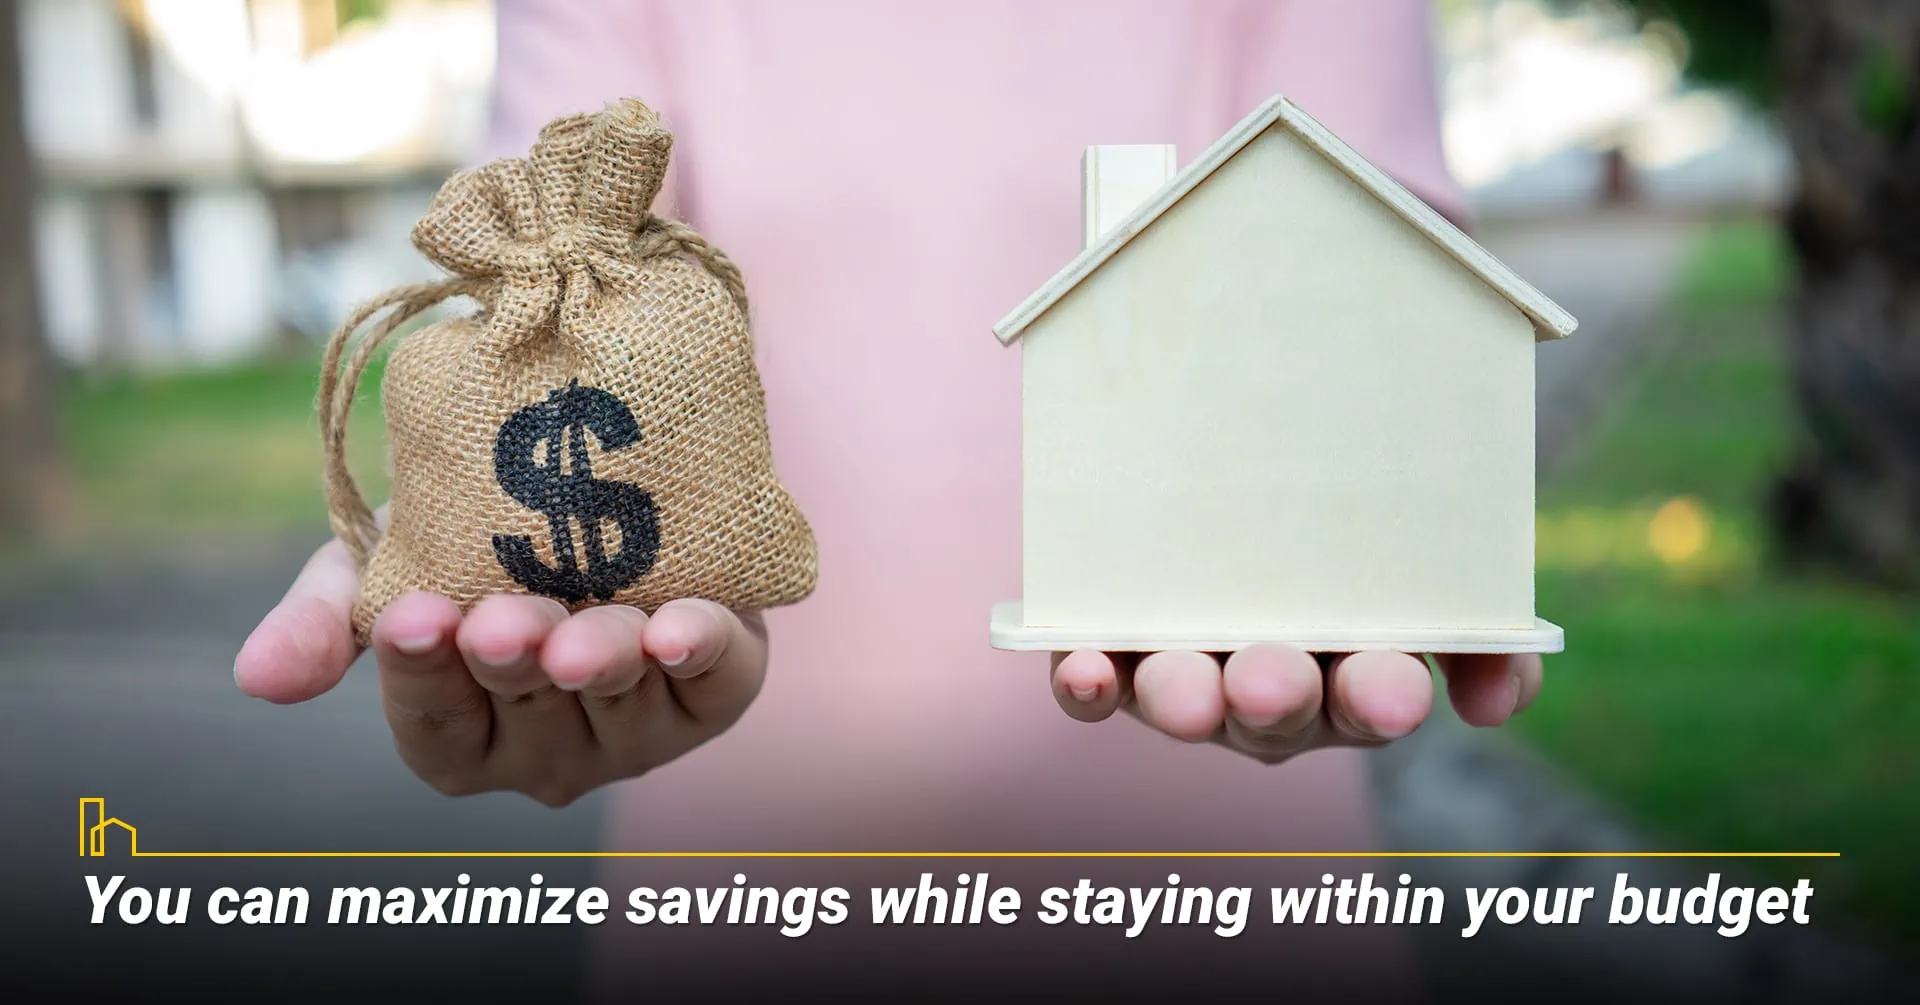 You can maximize savings while staying within your budget.